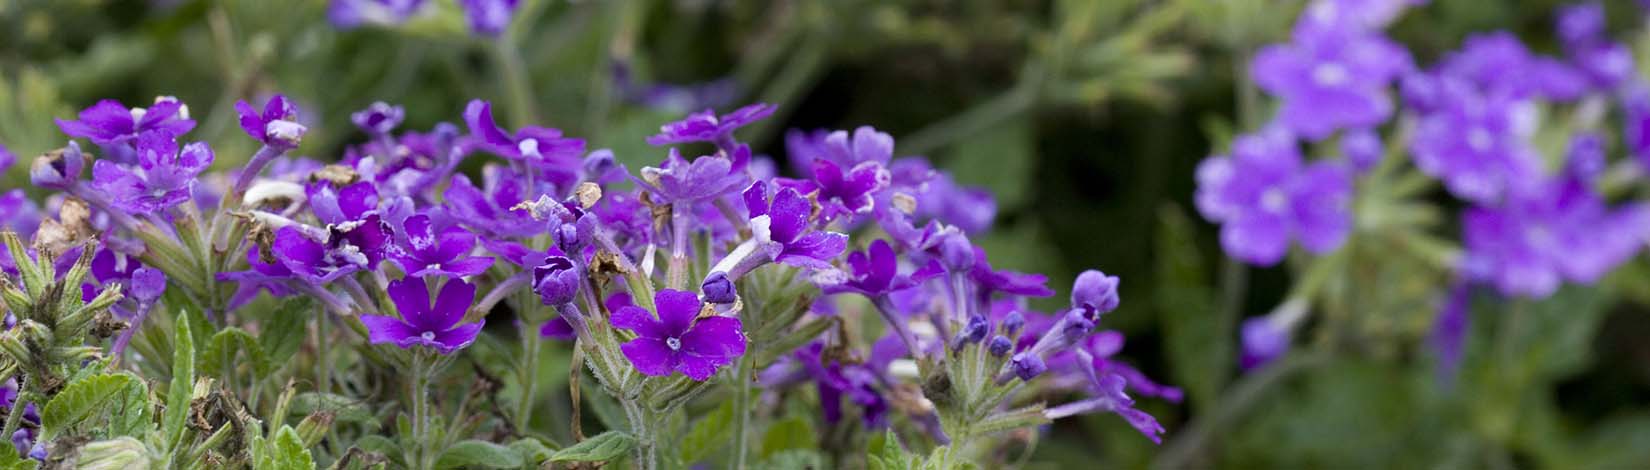 Florida flowers, specifically violets